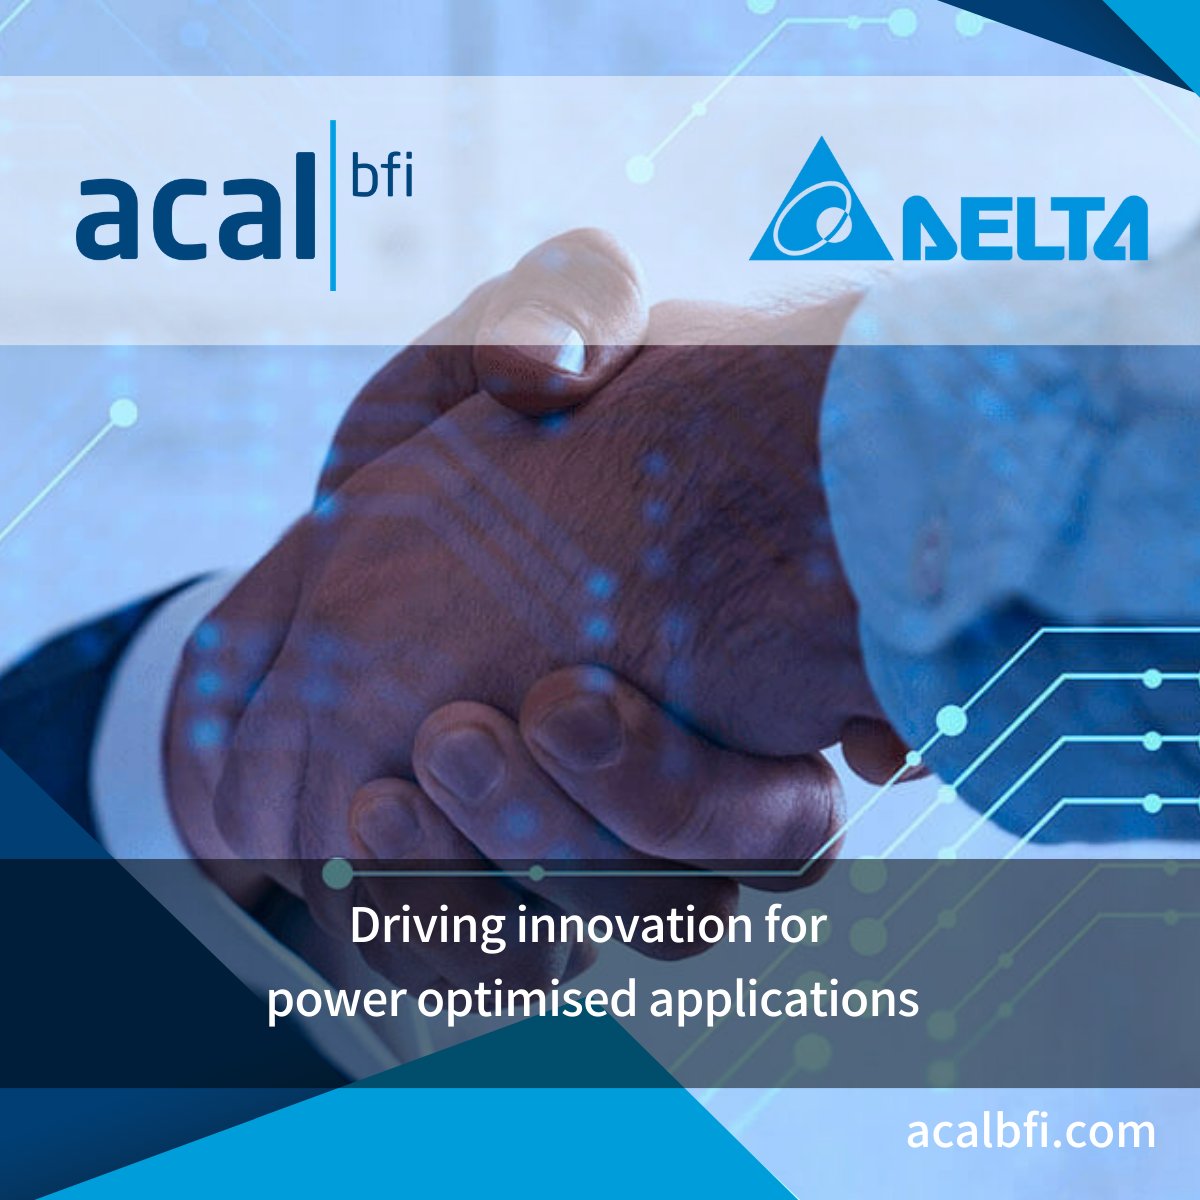 We're teaming up with Delta Electronics to revolutionise power solutions in EMEA. Create power-optimised applications for renewable energy, factory and machine automation and more. For more info visit: bit.ly/3SfIGsc #PowerSolutions #RenewableEnergy #Innovation